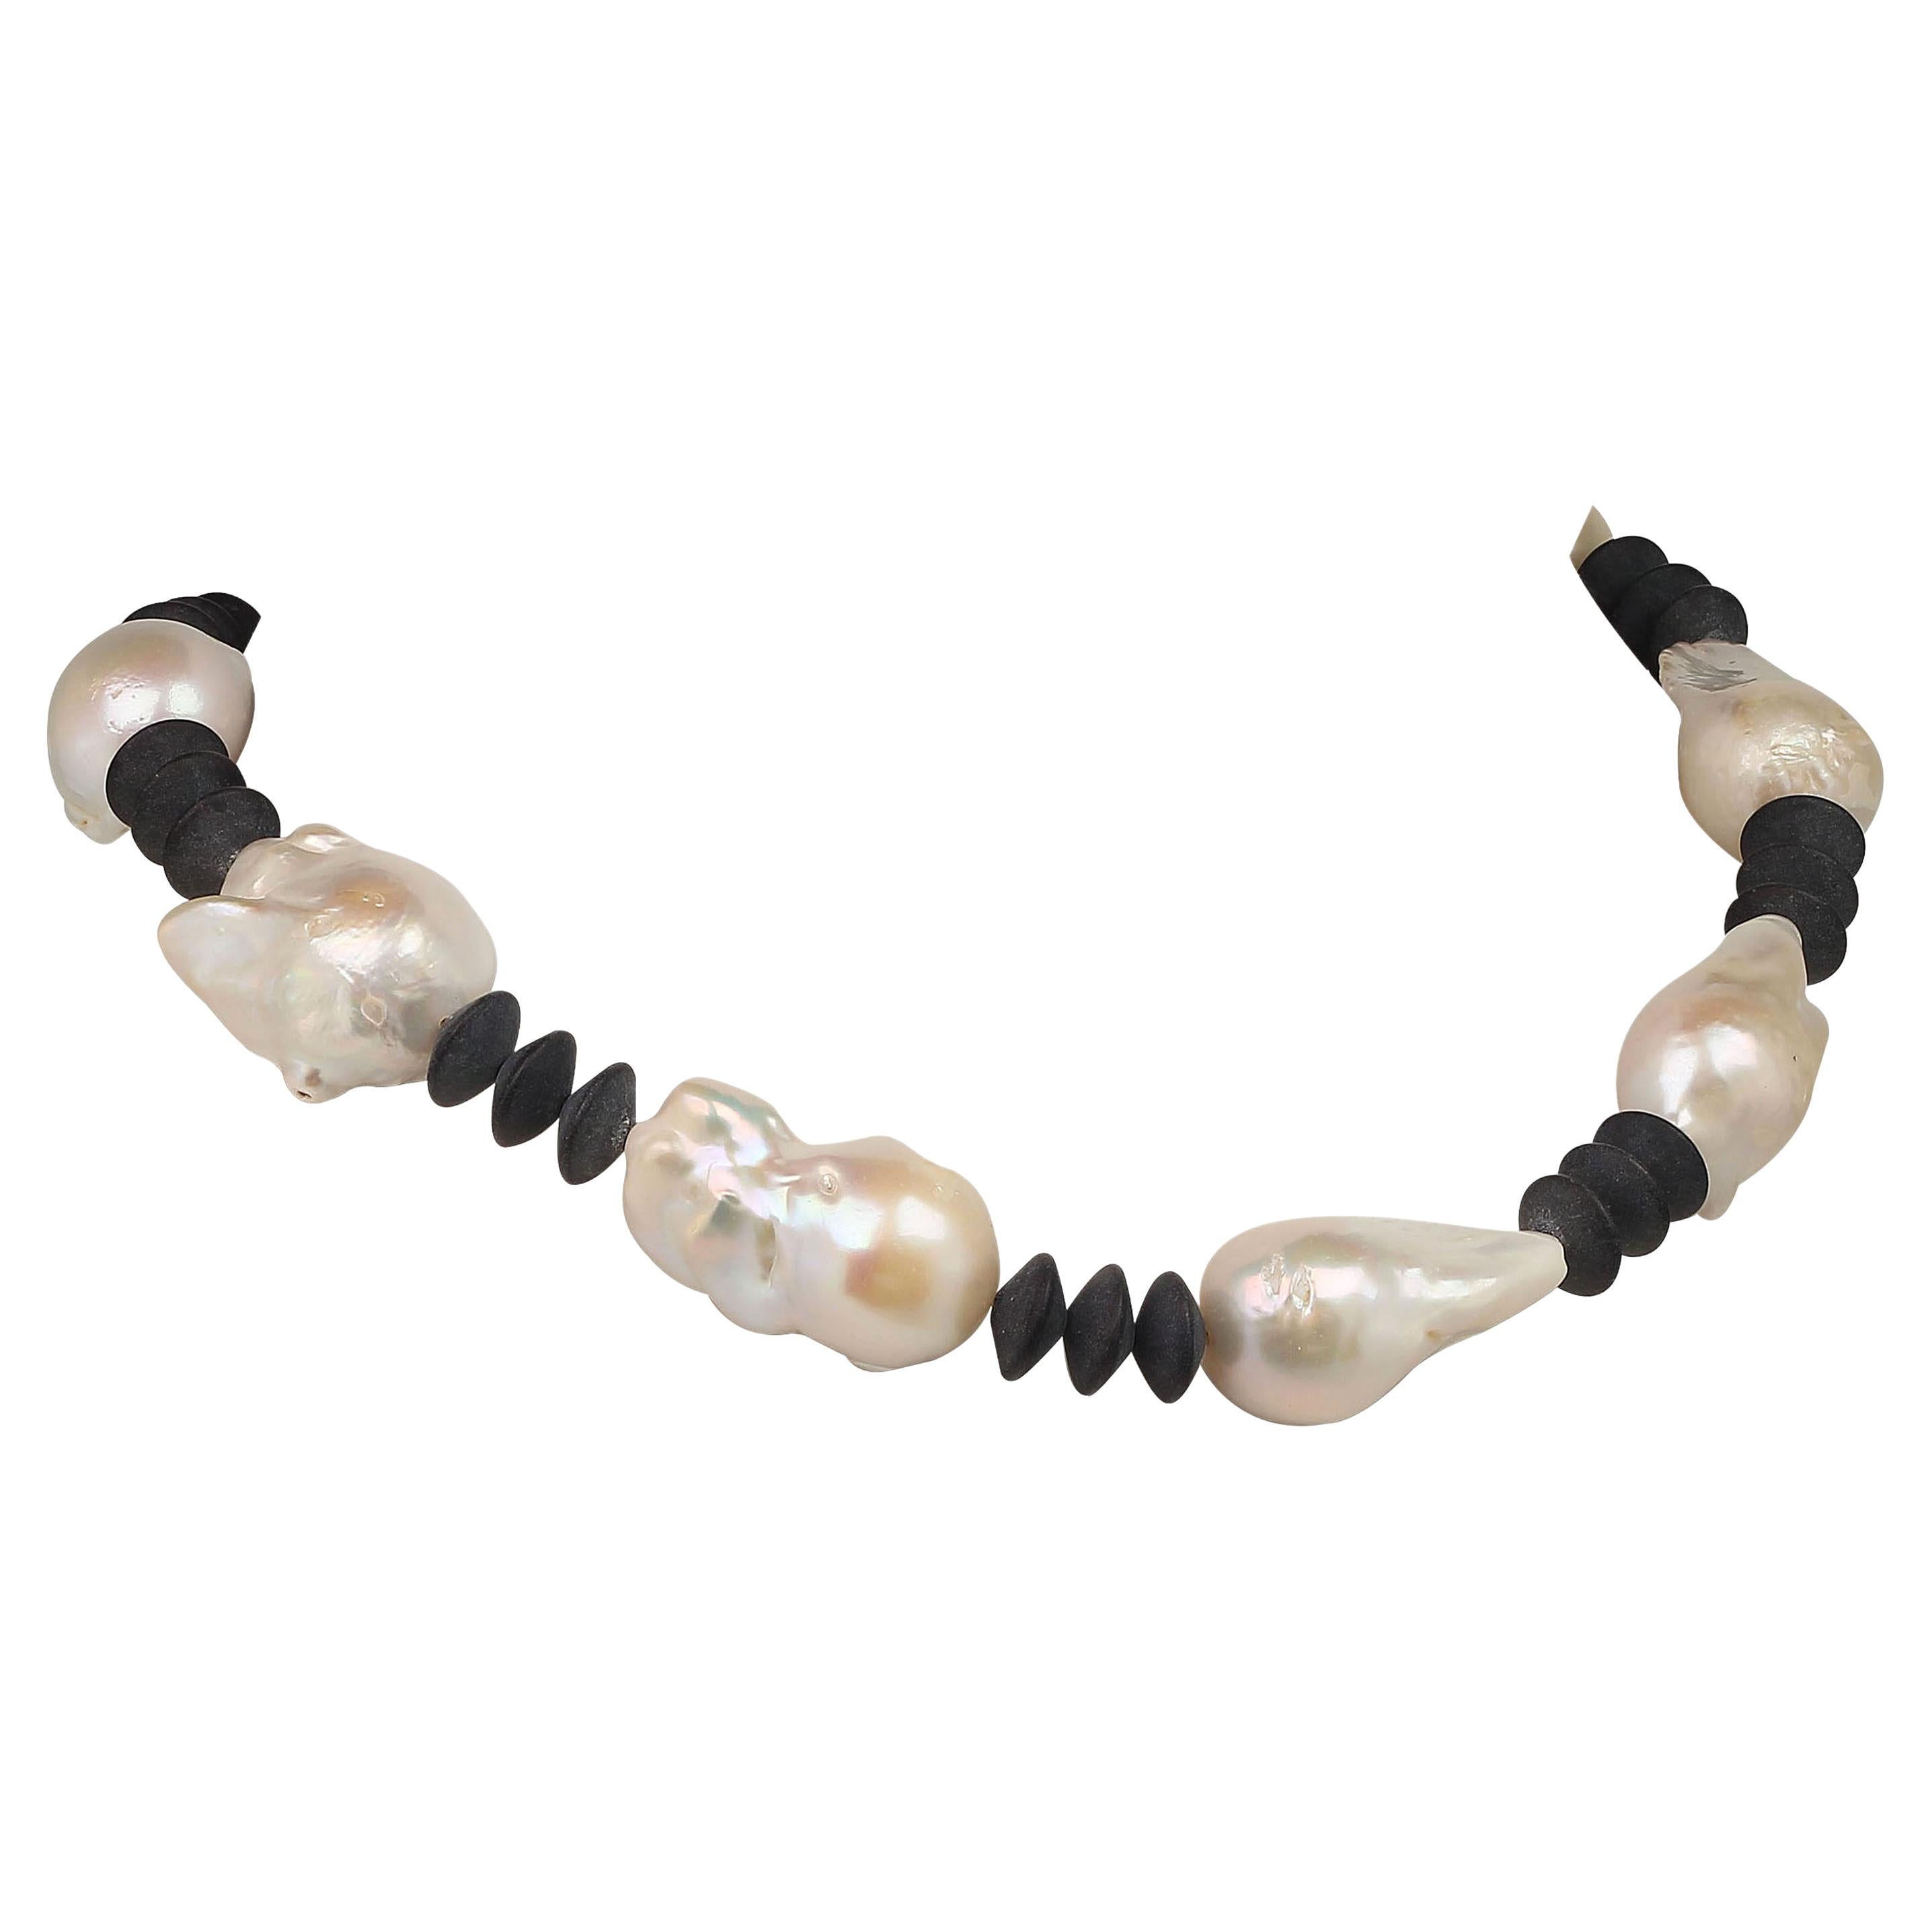 AJD 16 Inch Glorious White Baroque Pearls & Matte Onyx Black Rondelles Necklace